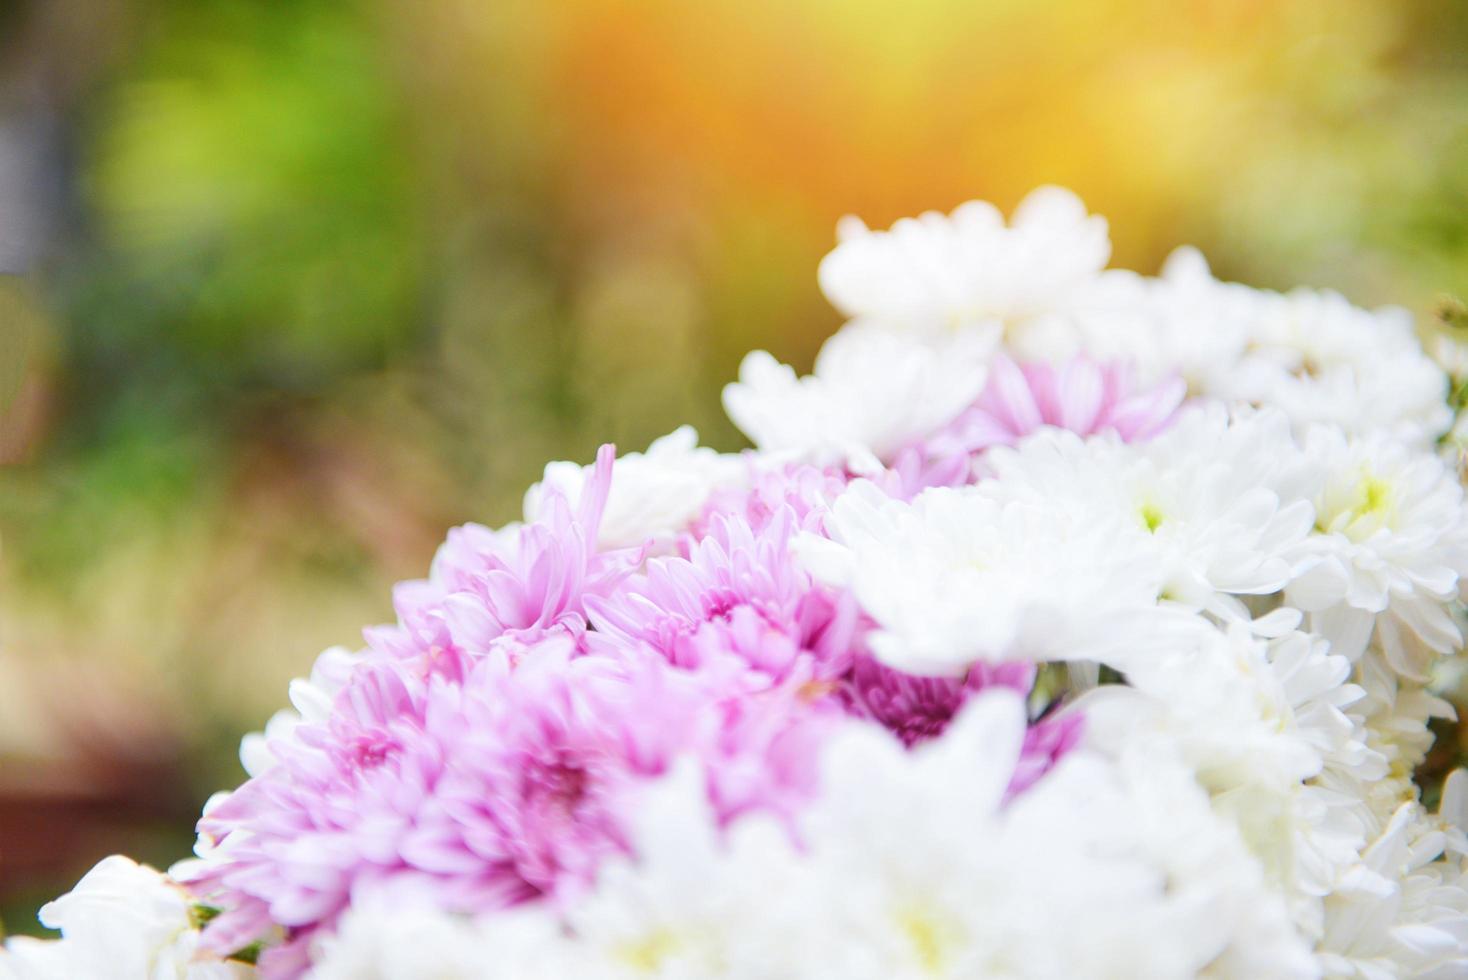 Bunch flower beautiful pink and white chrysanthemum - Chrysanthemum flowers decoration in a bright nature background photo